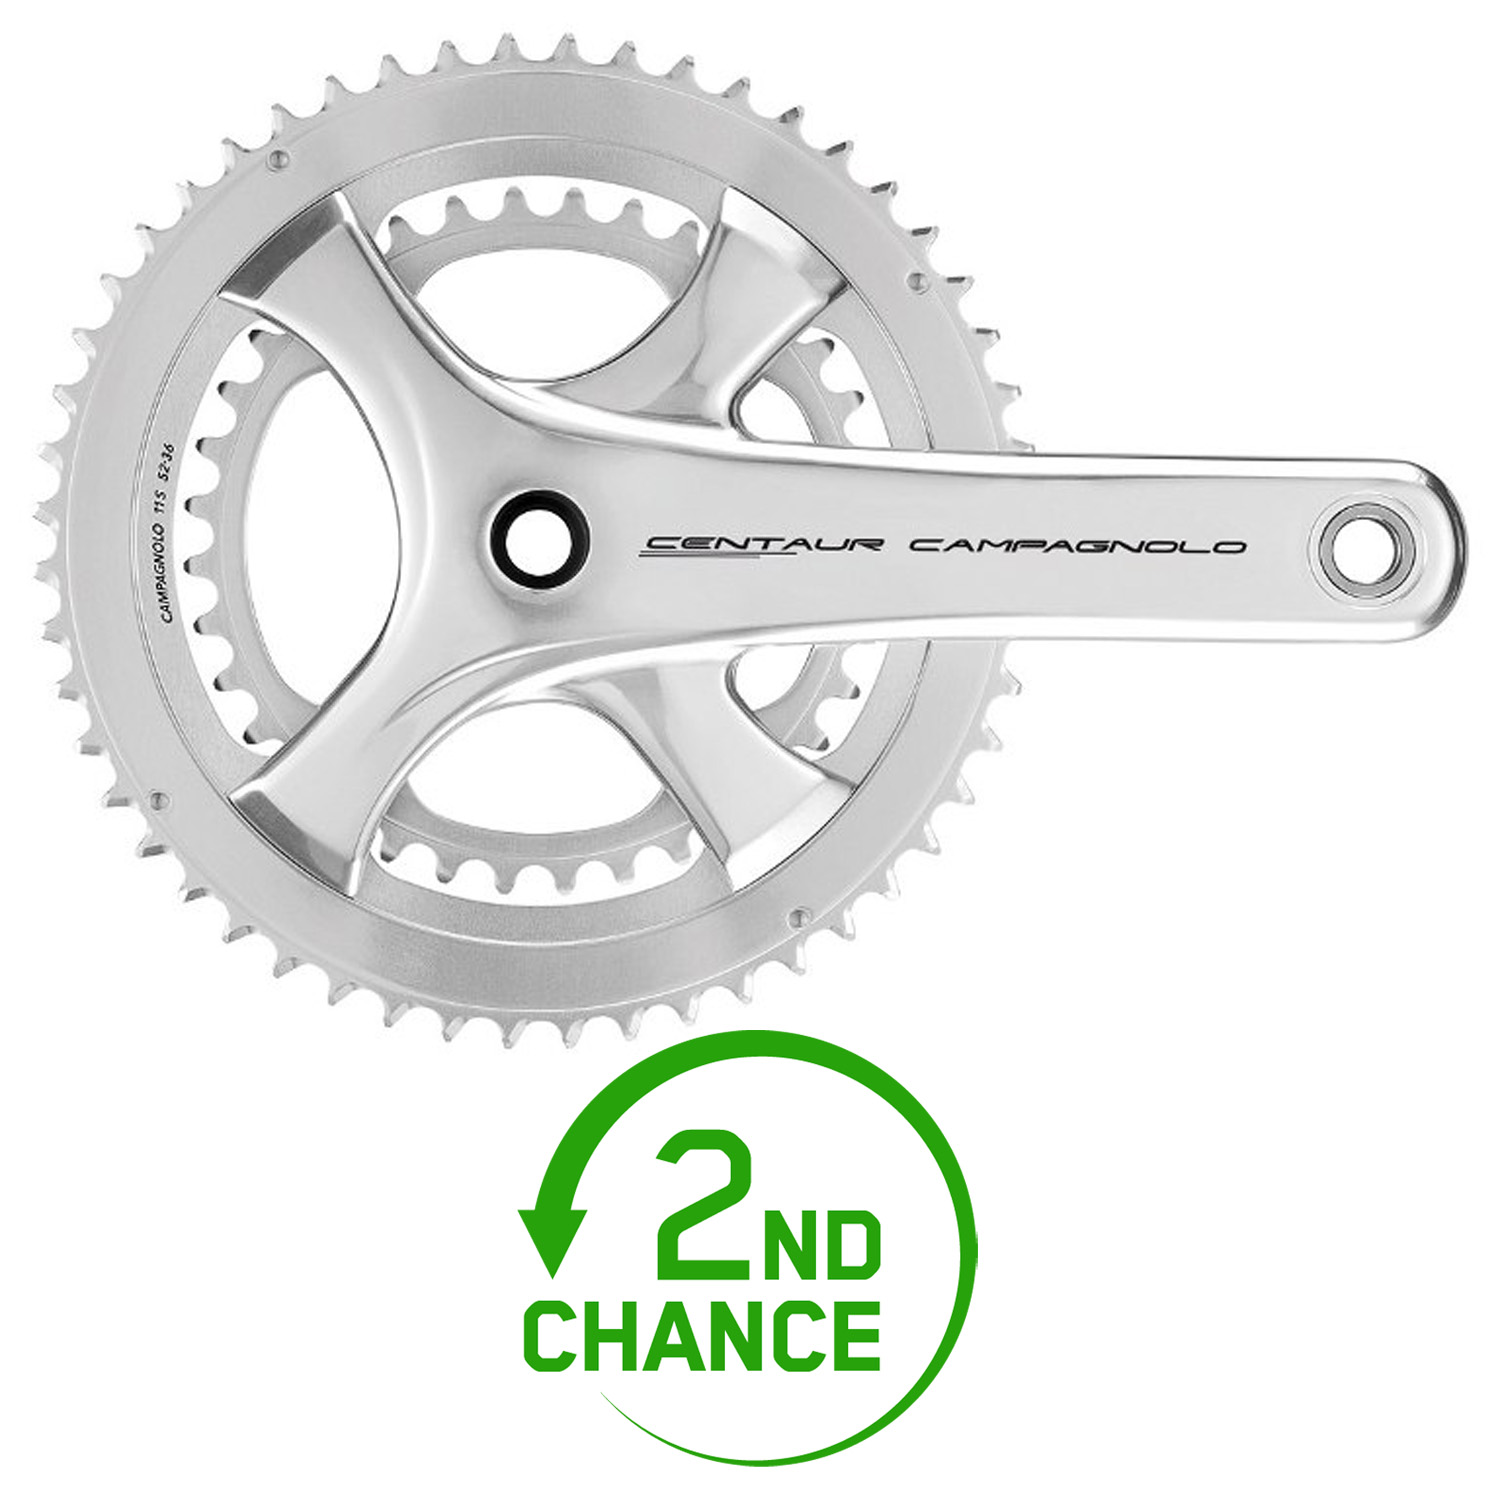 Picture of Campagnolo Centaur 11 Ultra-Torque Crankset 11-speed - silver - 2nd Choice